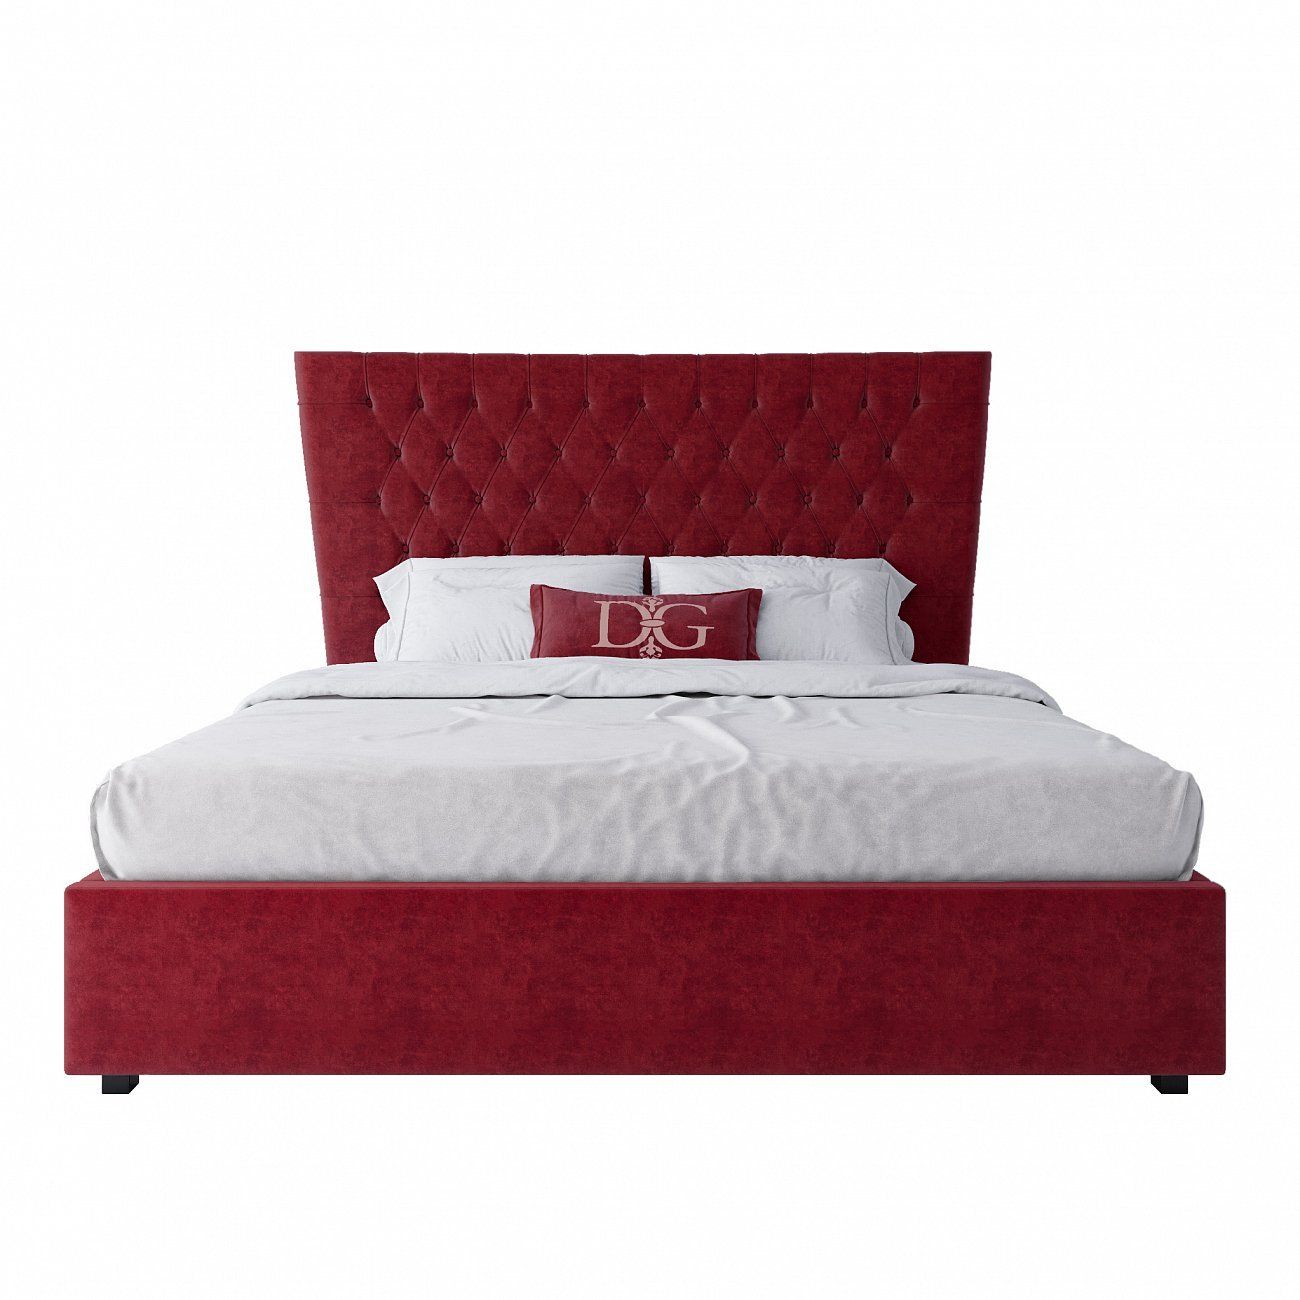 Double bed 180x200 red velour QuickSand